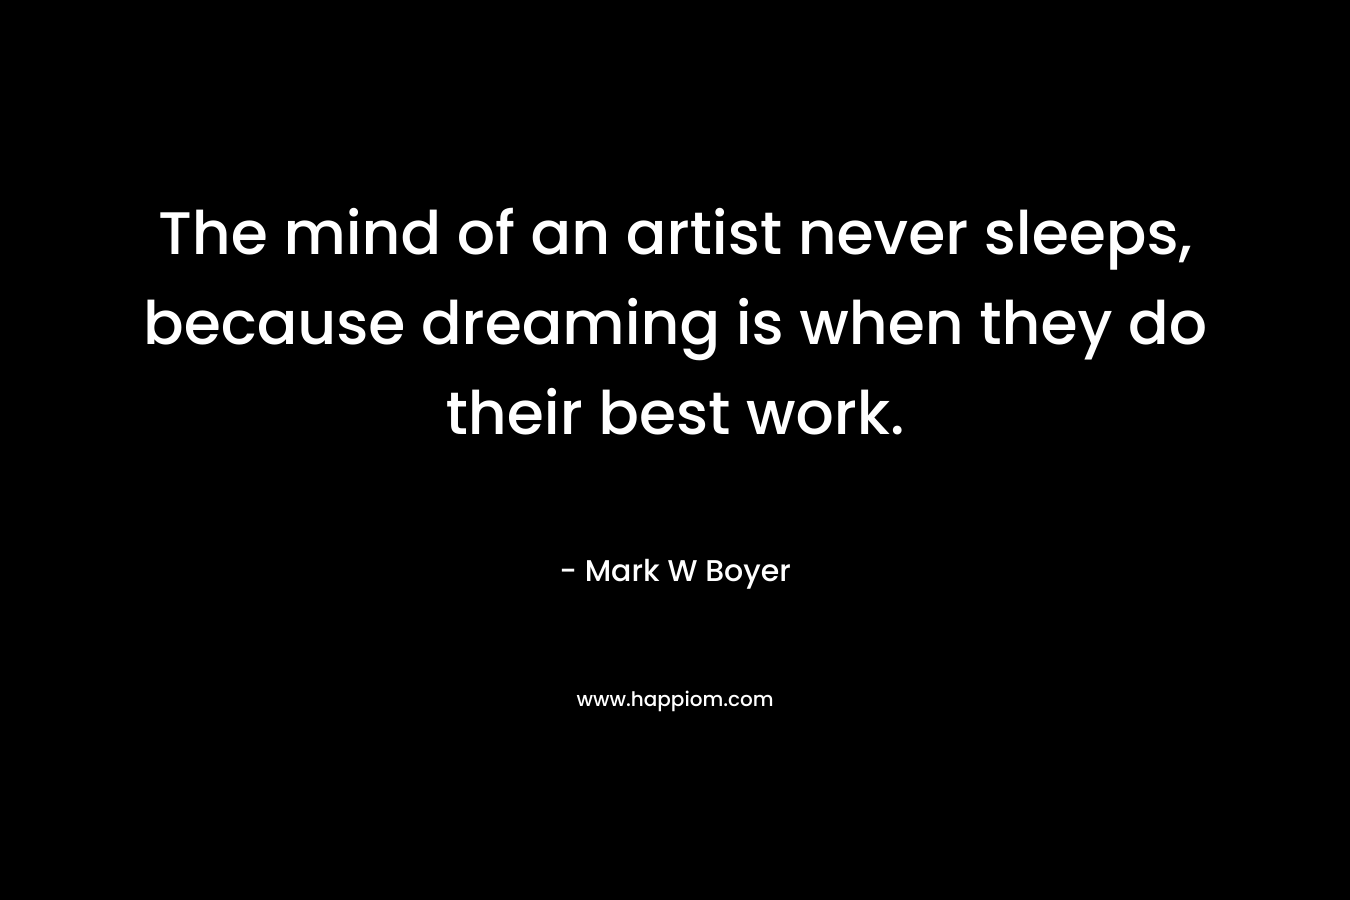 The mind of an artist never sleeps, because dreaming is when they do their best work.